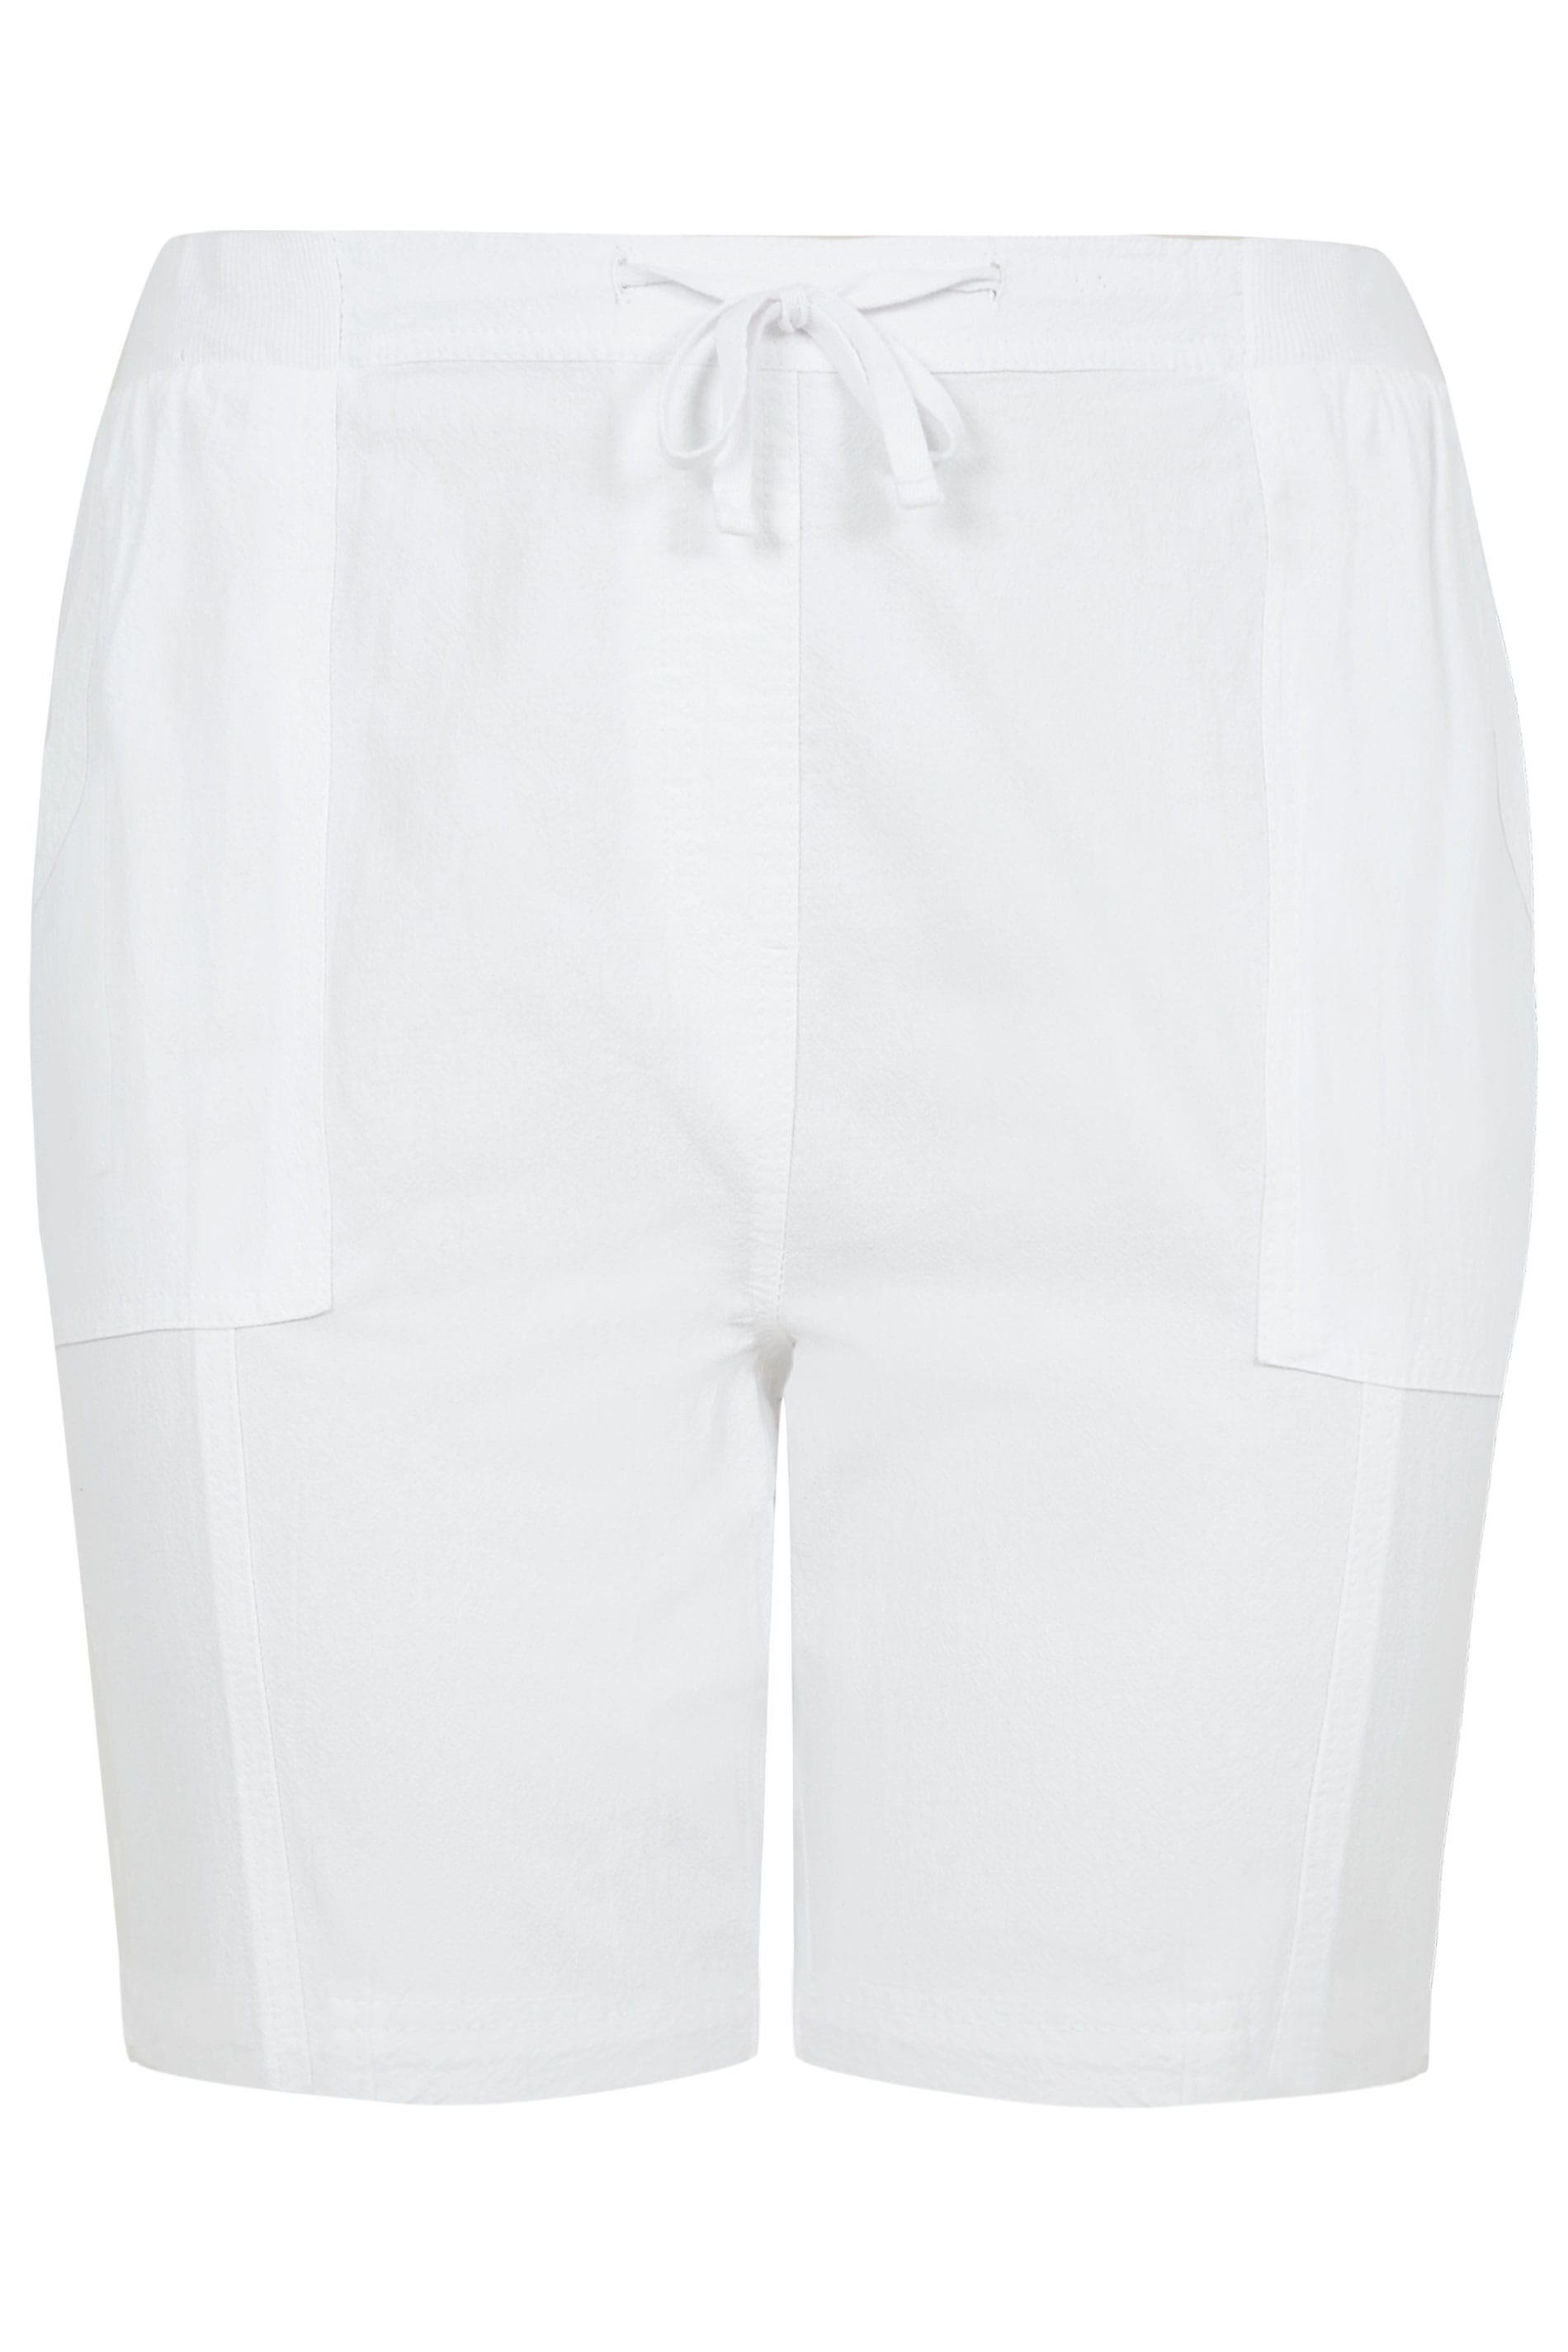 White Cool Cotton Pull On Shorts | Sizes 16 to 36 | Yours Clothing